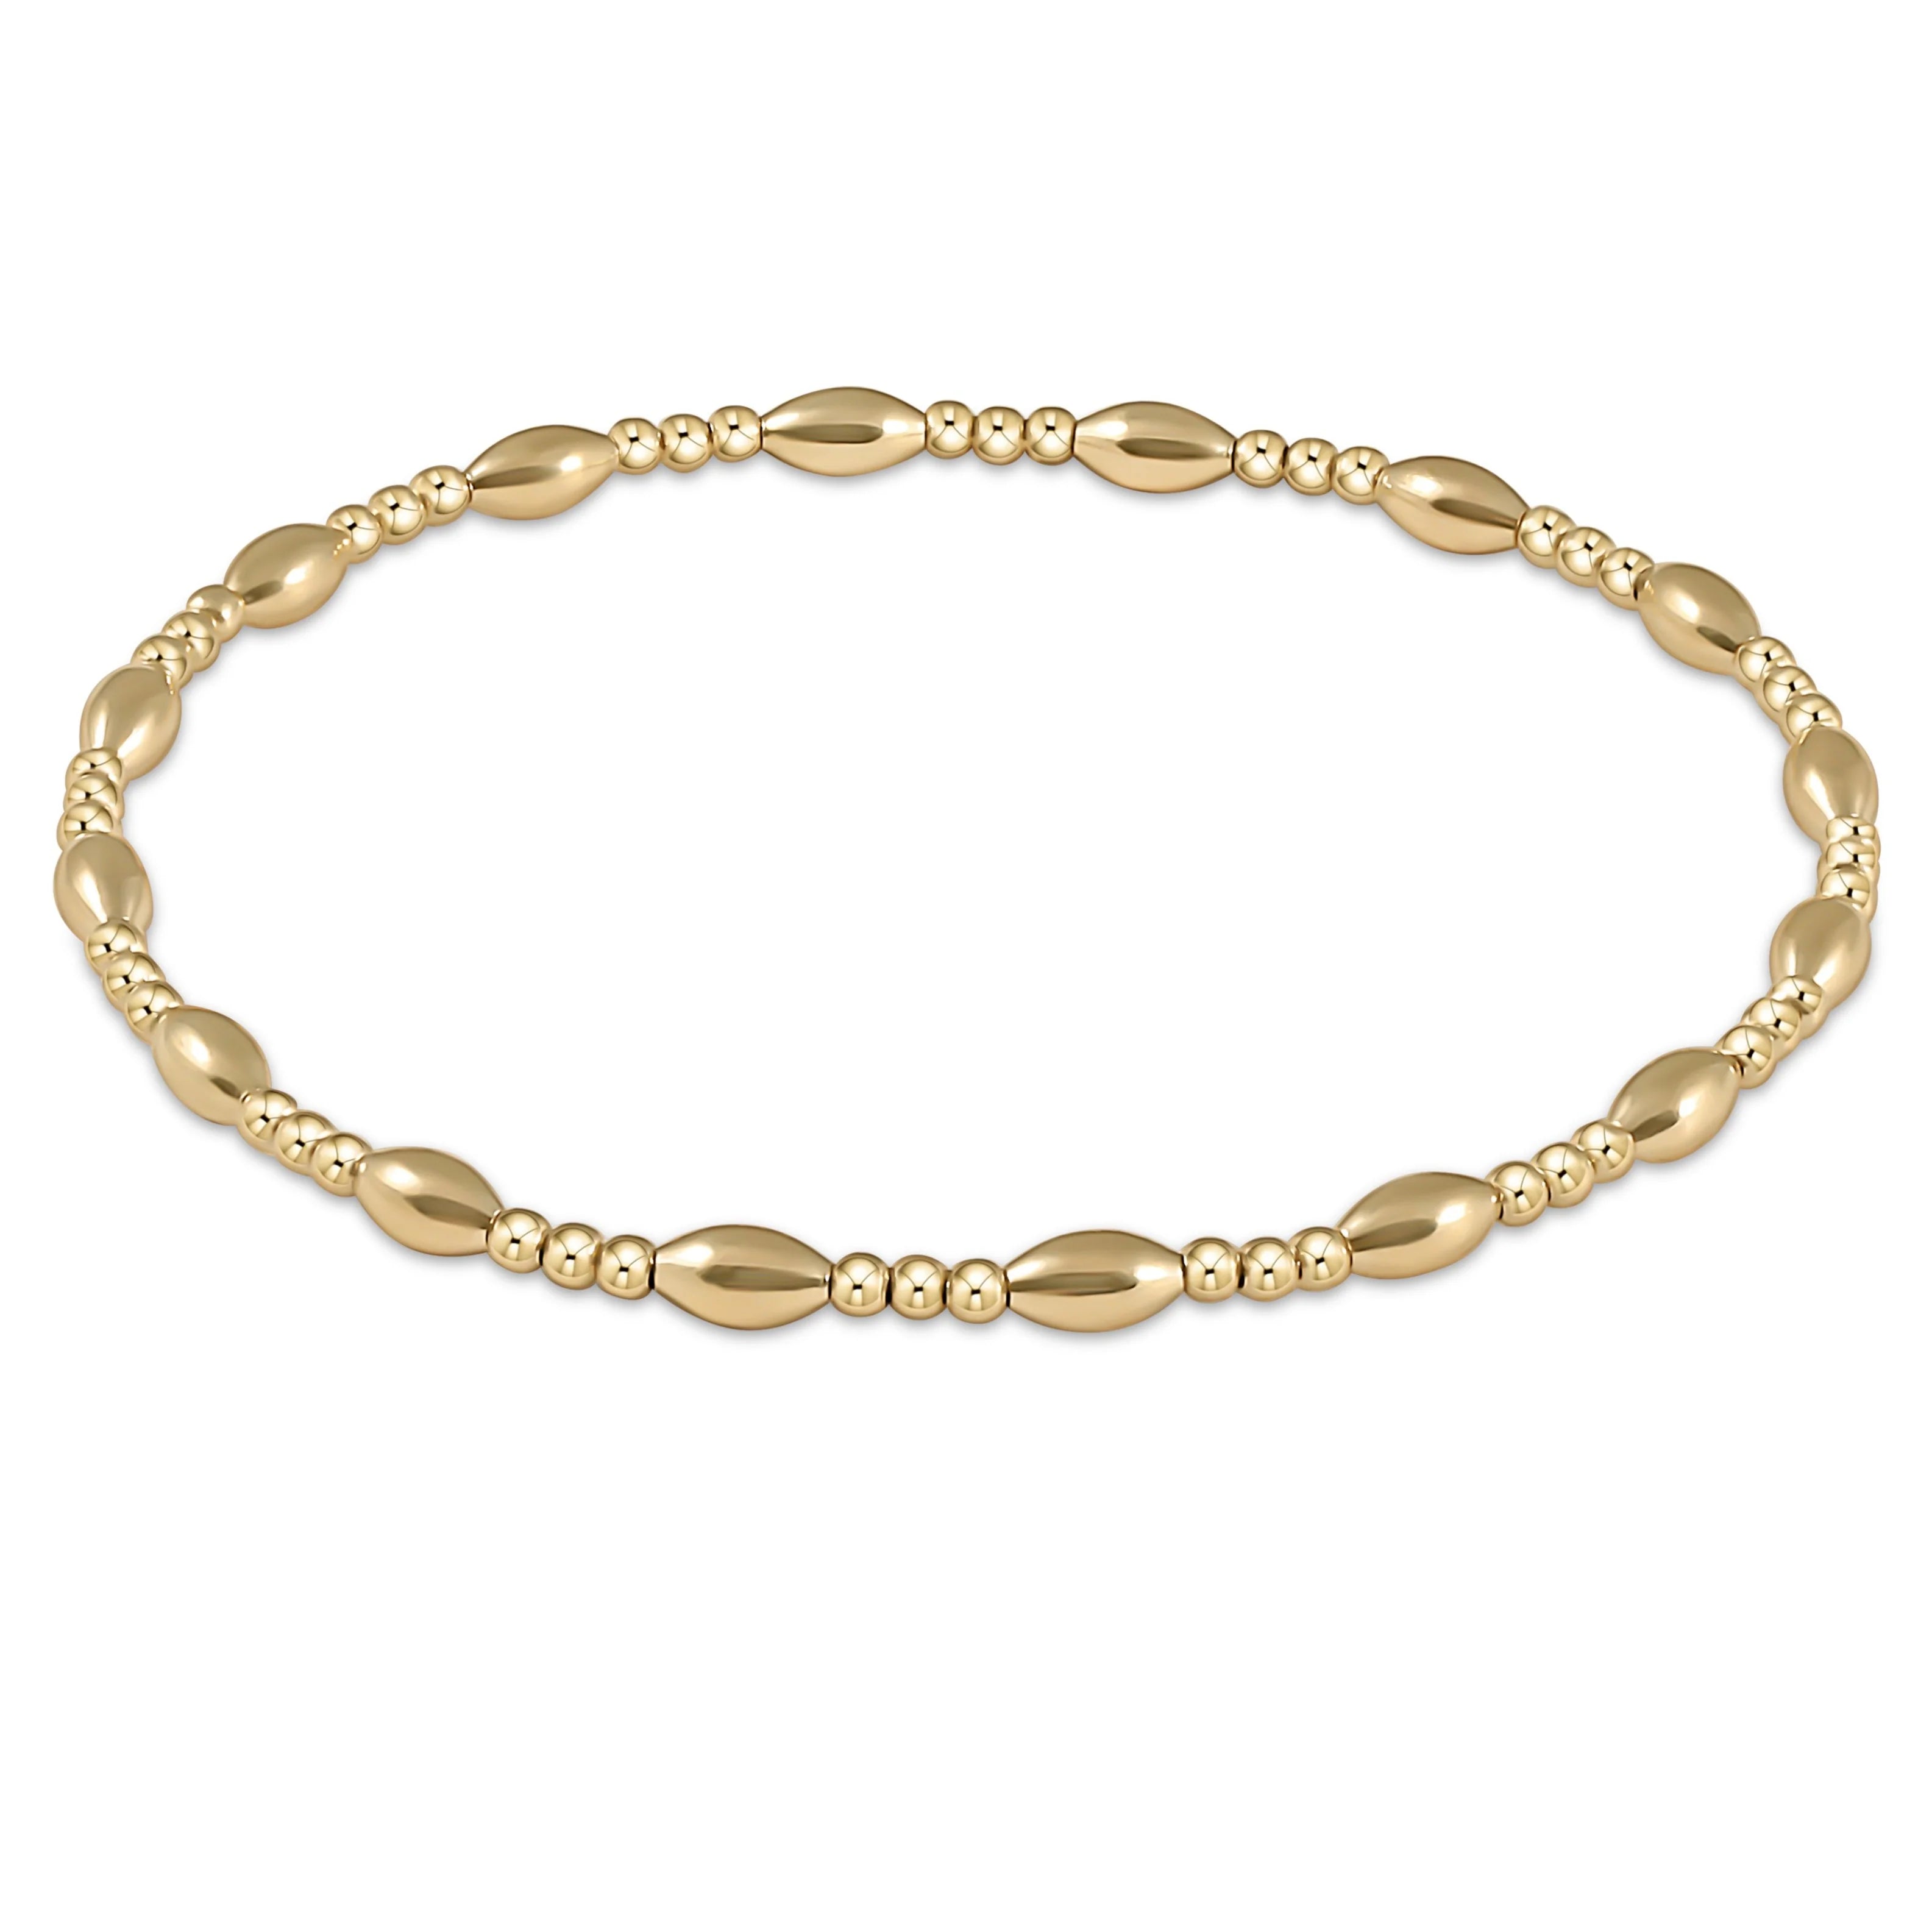 2mm Gold Bead and Mixed Oval Bead Bracelet